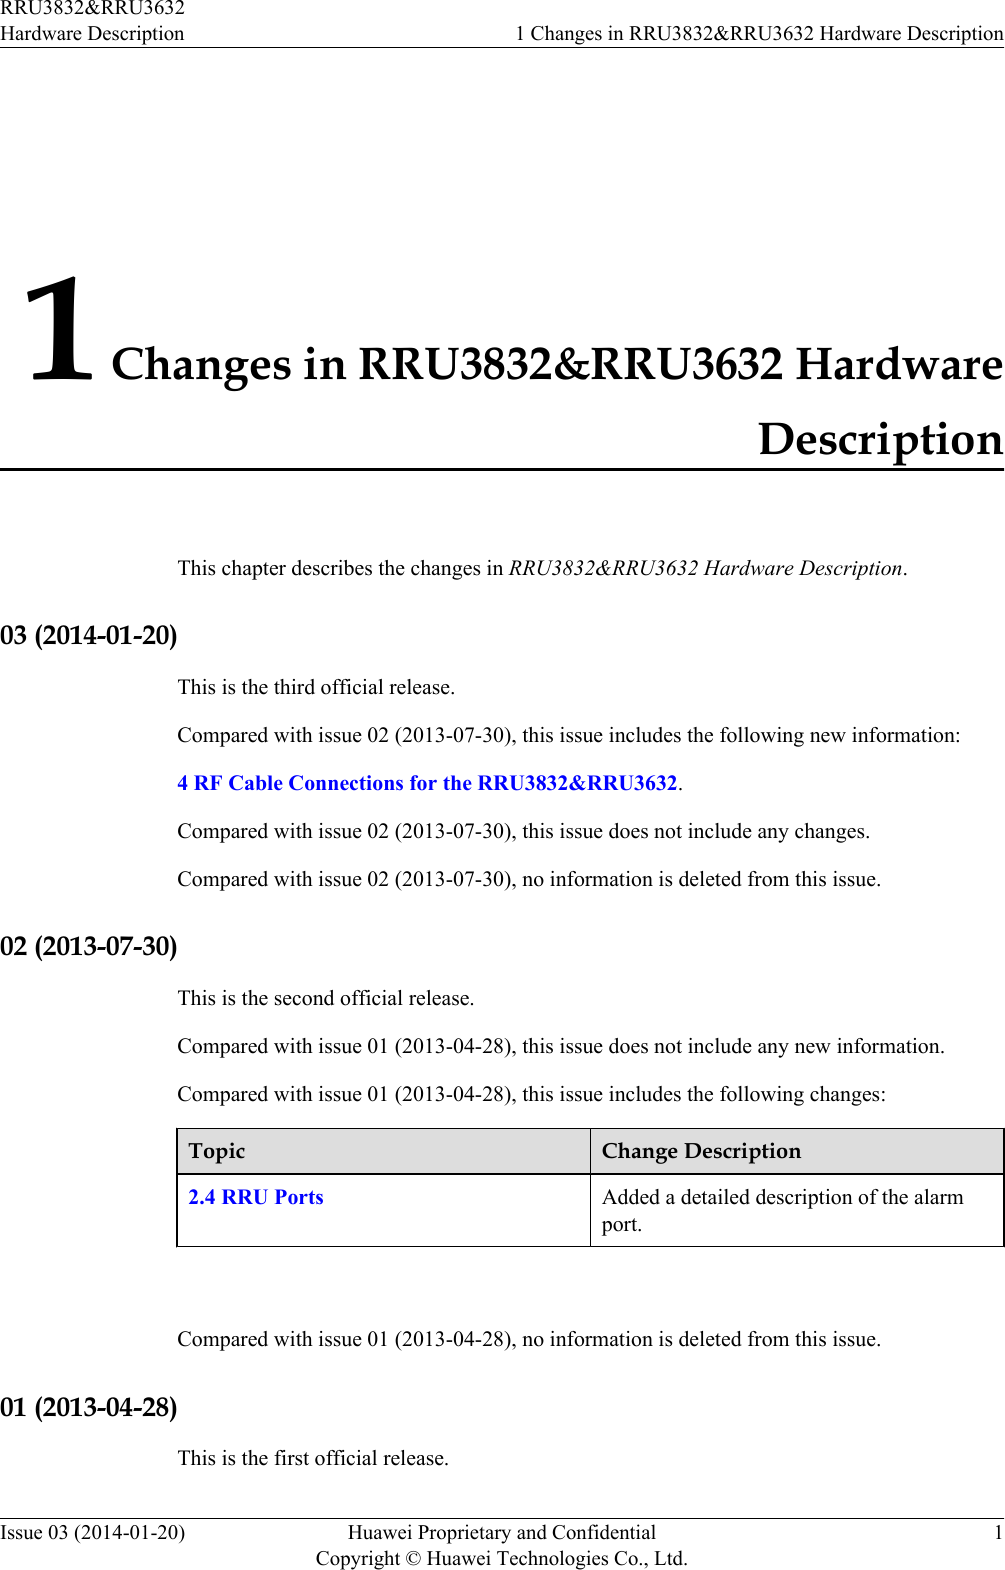 1 Changes in RRU3832&amp;RRU3632 HardwareDescriptionThis chapter describes the changes in RRU3832&amp;RRU3632 Hardware Description.03 (2014-01-20)This is the third official release.Compared with issue 02 (2013-07-30), this issue includes the following new information:4 RF Cable Connections for the RRU3832&amp;RRU3632.Compared with issue 02 (2013-07-30), this issue does not include any changes.Compared with issue 02 (2013-07-30), no information is deleted from this issue.02 (2013-07-30)This is the second official release.Compared with issue 01 (2013-04-28), this issue does not include any new information.Compared with issue 01 (2013-04-28), this issue includes the following changes:Topic Change Description2.4 RRU Ports Added a detailed description of the alarmport. Compared with issue 01 (2013-04-28), no information is deleted from this issue.01 (2013-04-28)This is the first official release.RRU3832&amp;RRU3632Hardware Description 1 Changes in RRU3832&amp;RRU3632 Hardware DescriptionIssue 03 (2014-01-20) Huawei Proprietary and ConfidentialCopyright © Huawei Technologies Co., Ltd.1